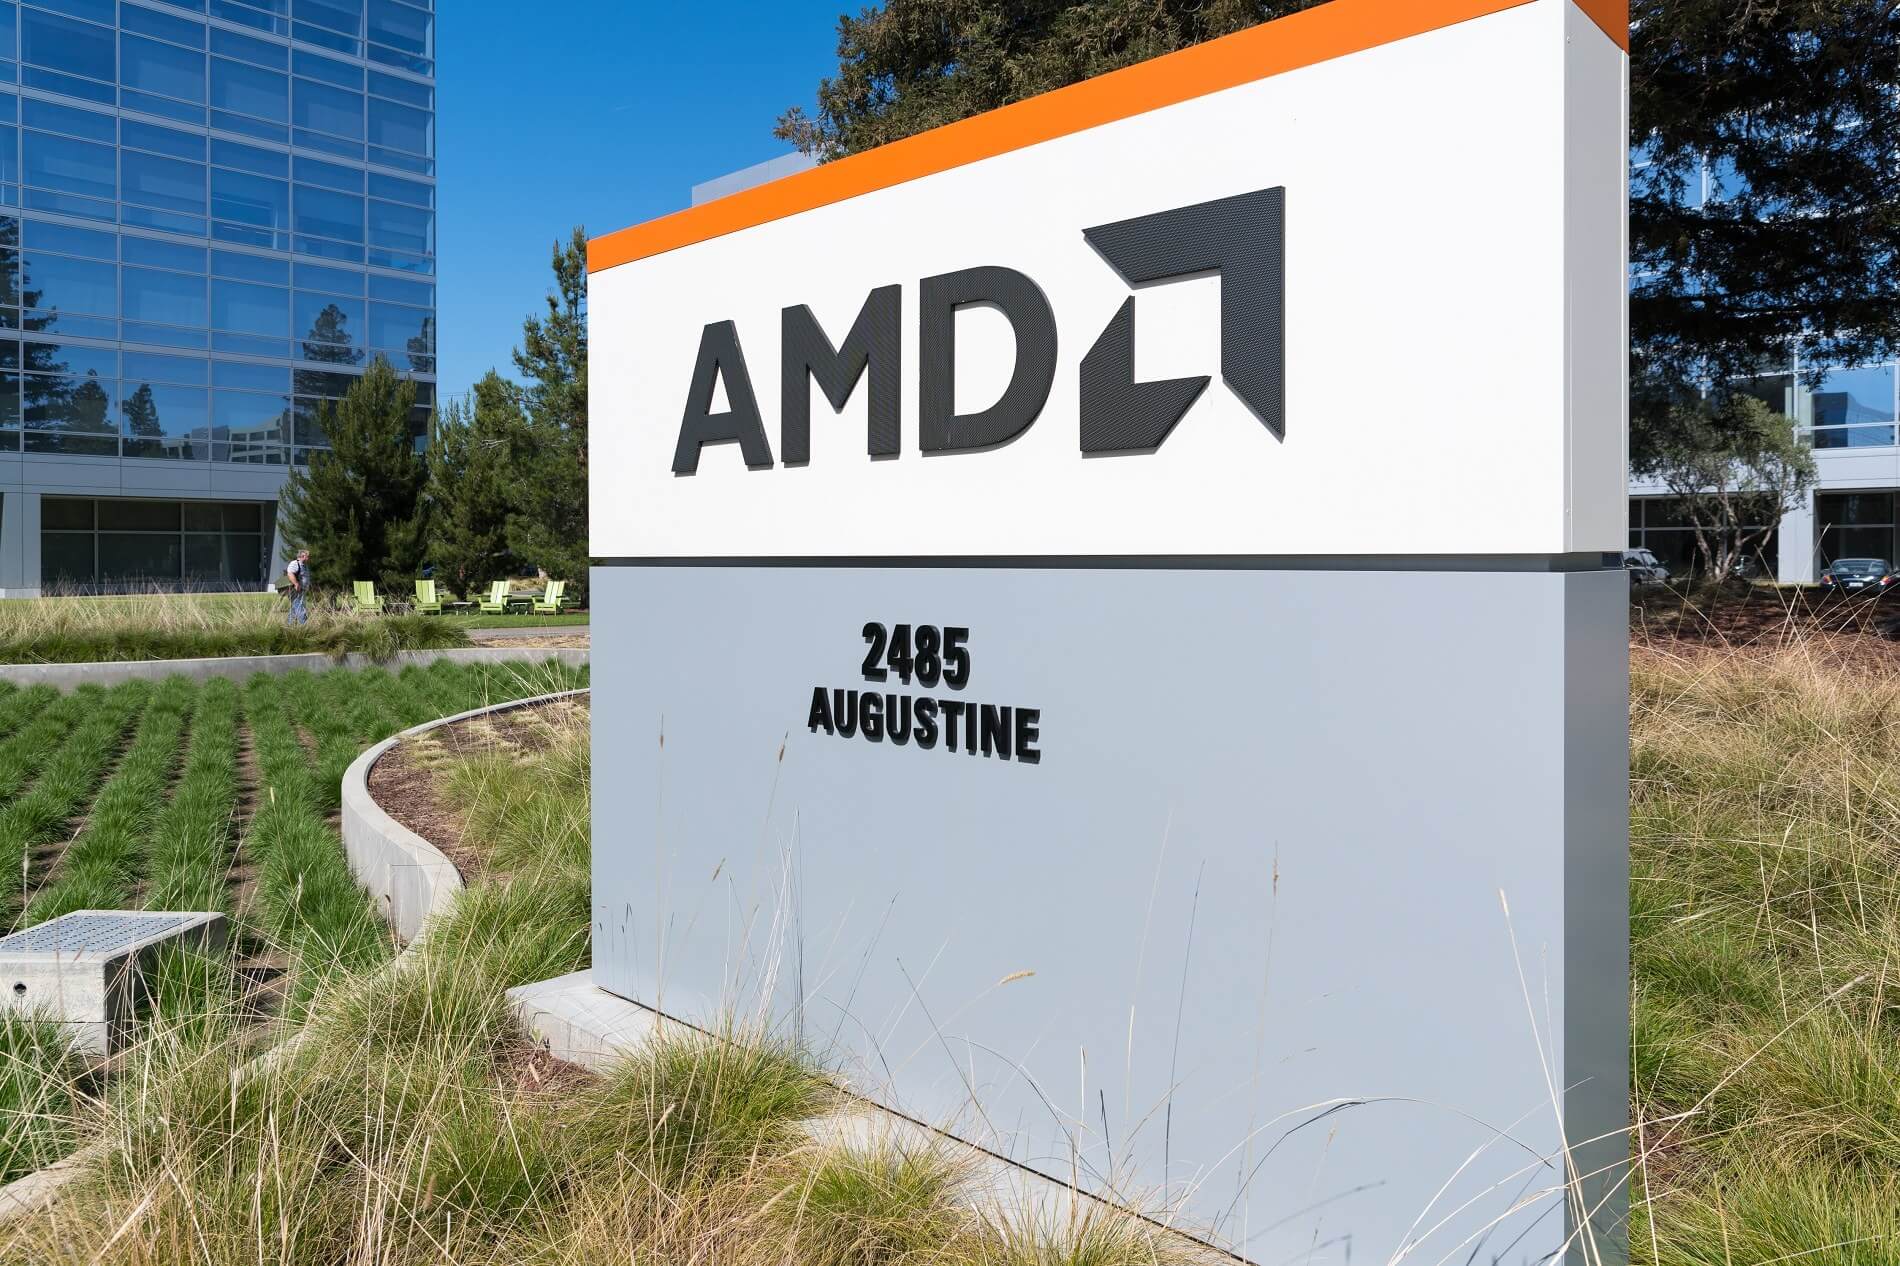 AMD stock falls 22% on back of missed Q3 targets, disappointing Q4 outlook